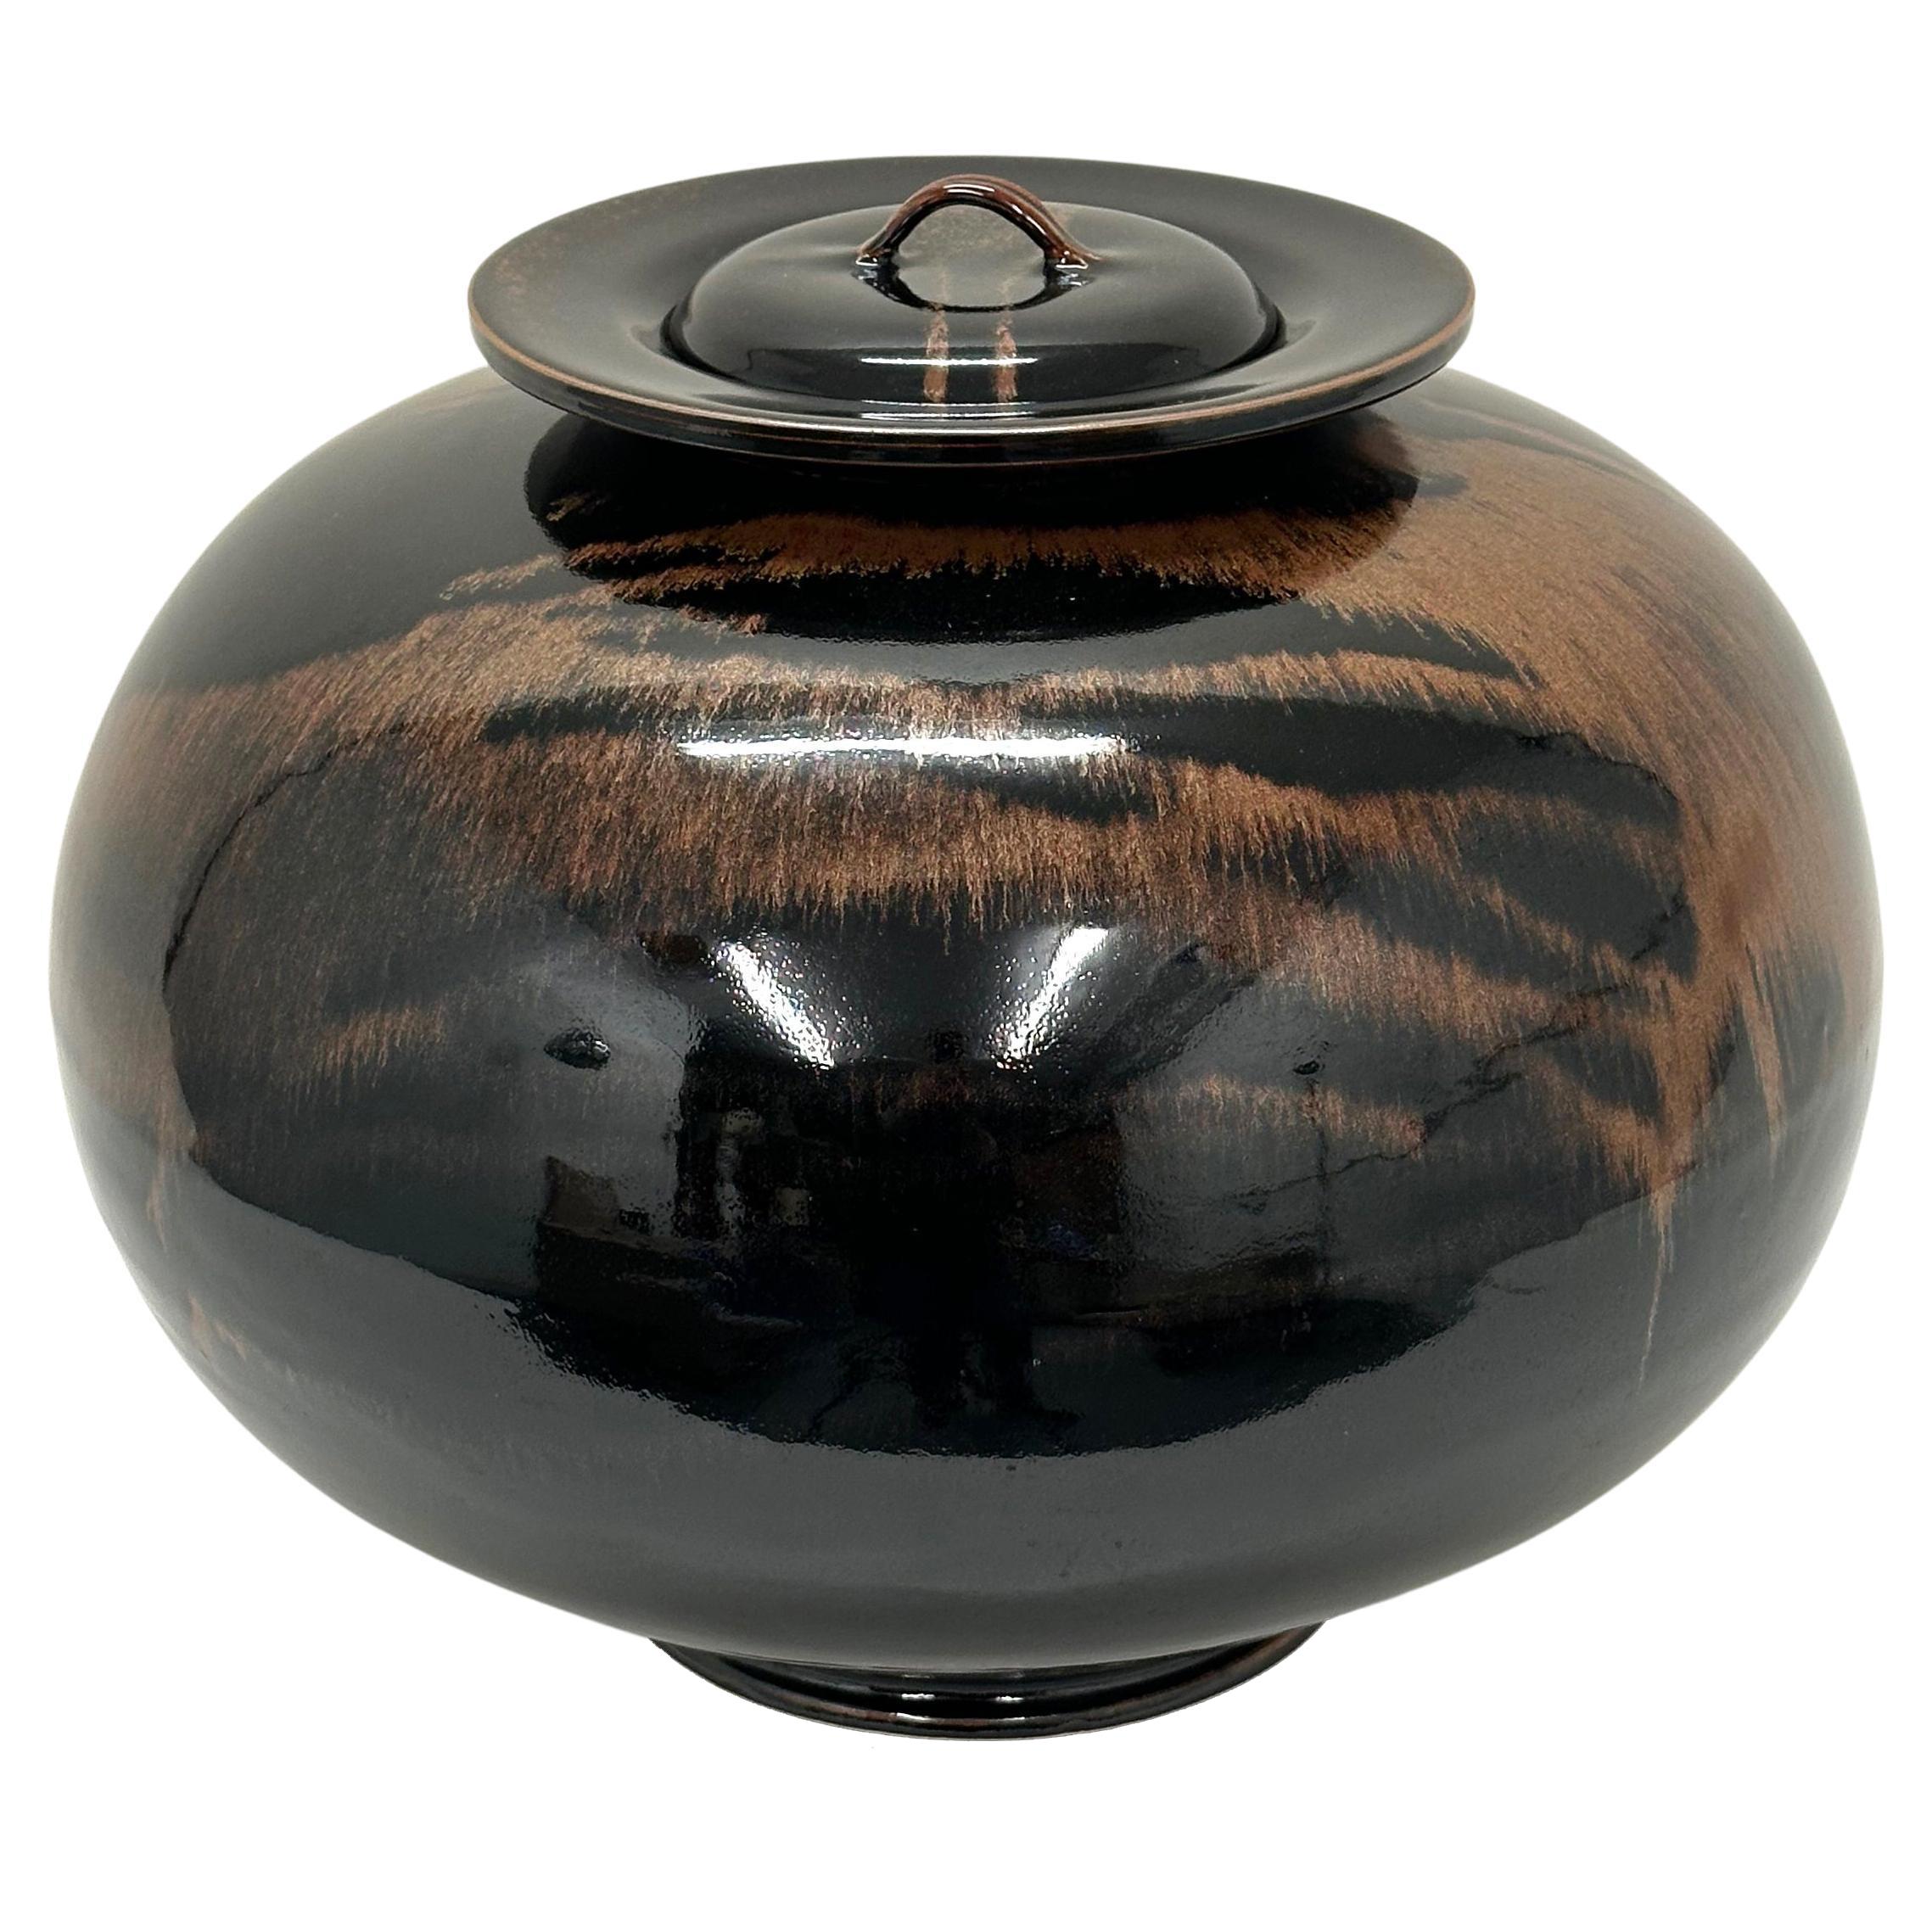 A large globular vase with cover in honan tenmoku glaze by Brother Thomas Bezanson. USA, 1993. Signed. Pucker Gallery catalog number, TH975. Rotating display base included (not shown).

Brother Thomas Bezanson was an internationally renowned ceramic